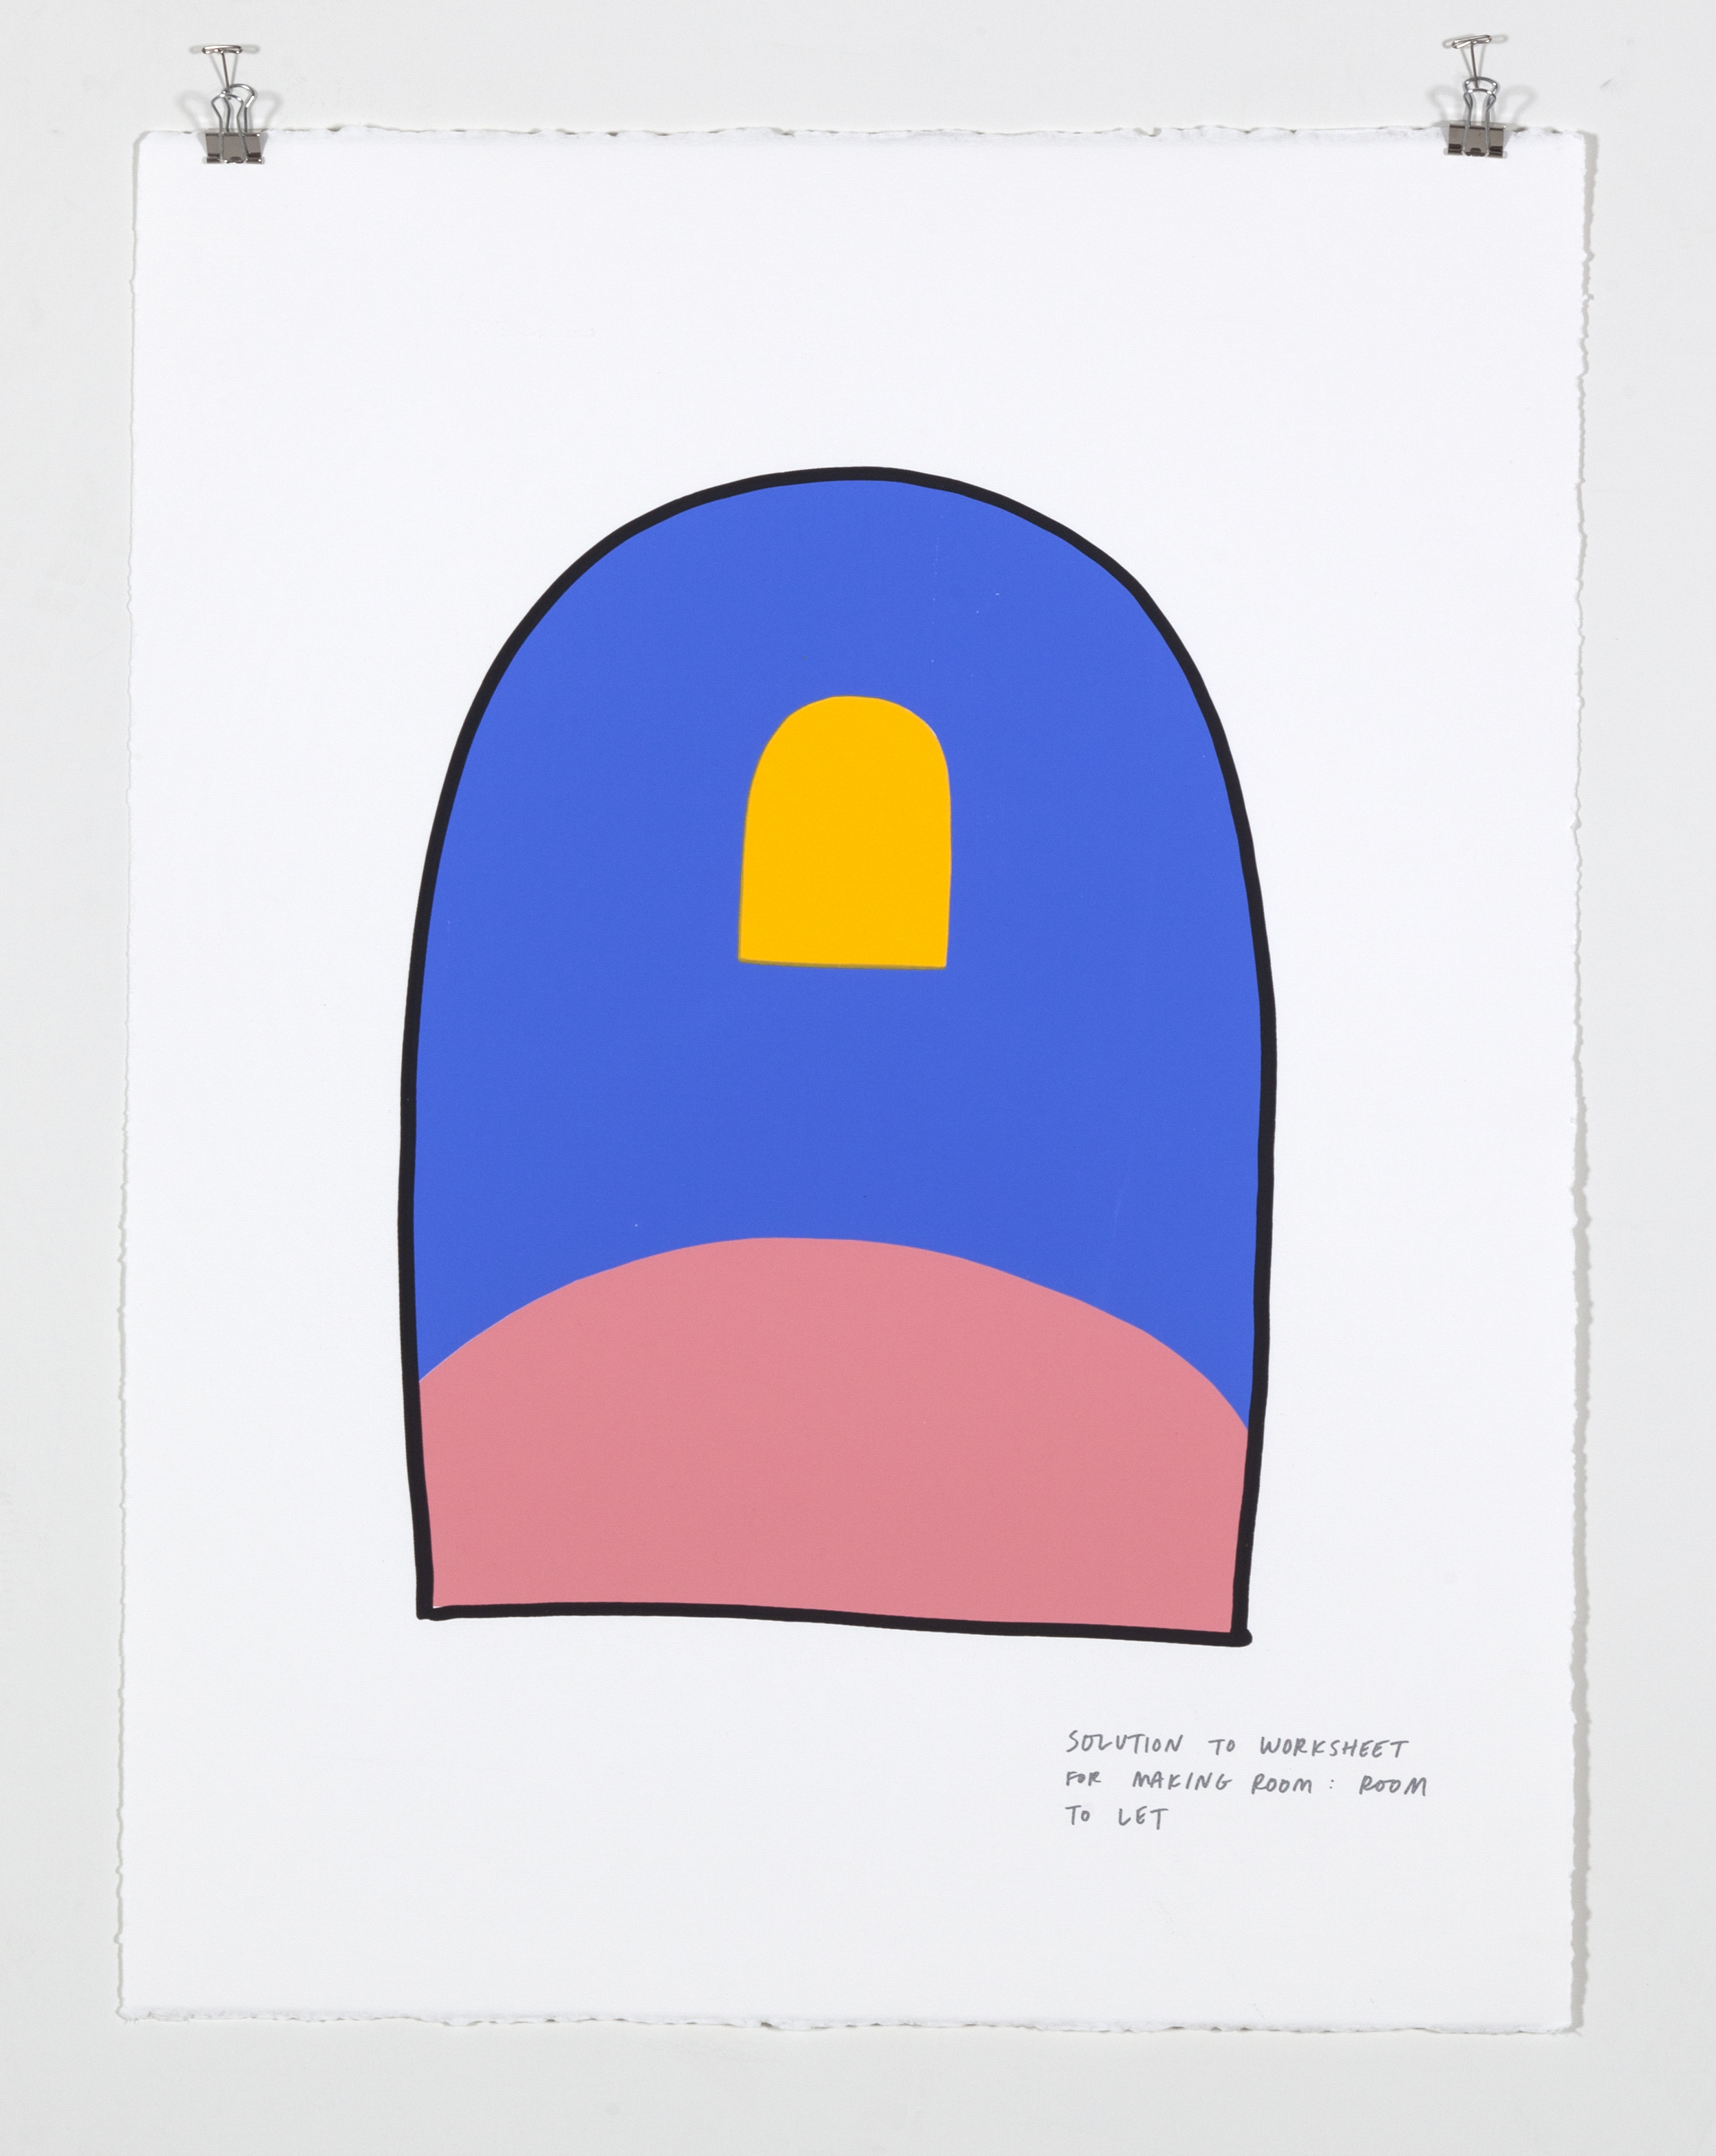    Solution to Worksheet for Making Room: Room to Let,  2018  Five color silkscreen print on paper 19 7/8 x 25 7/8 inches 